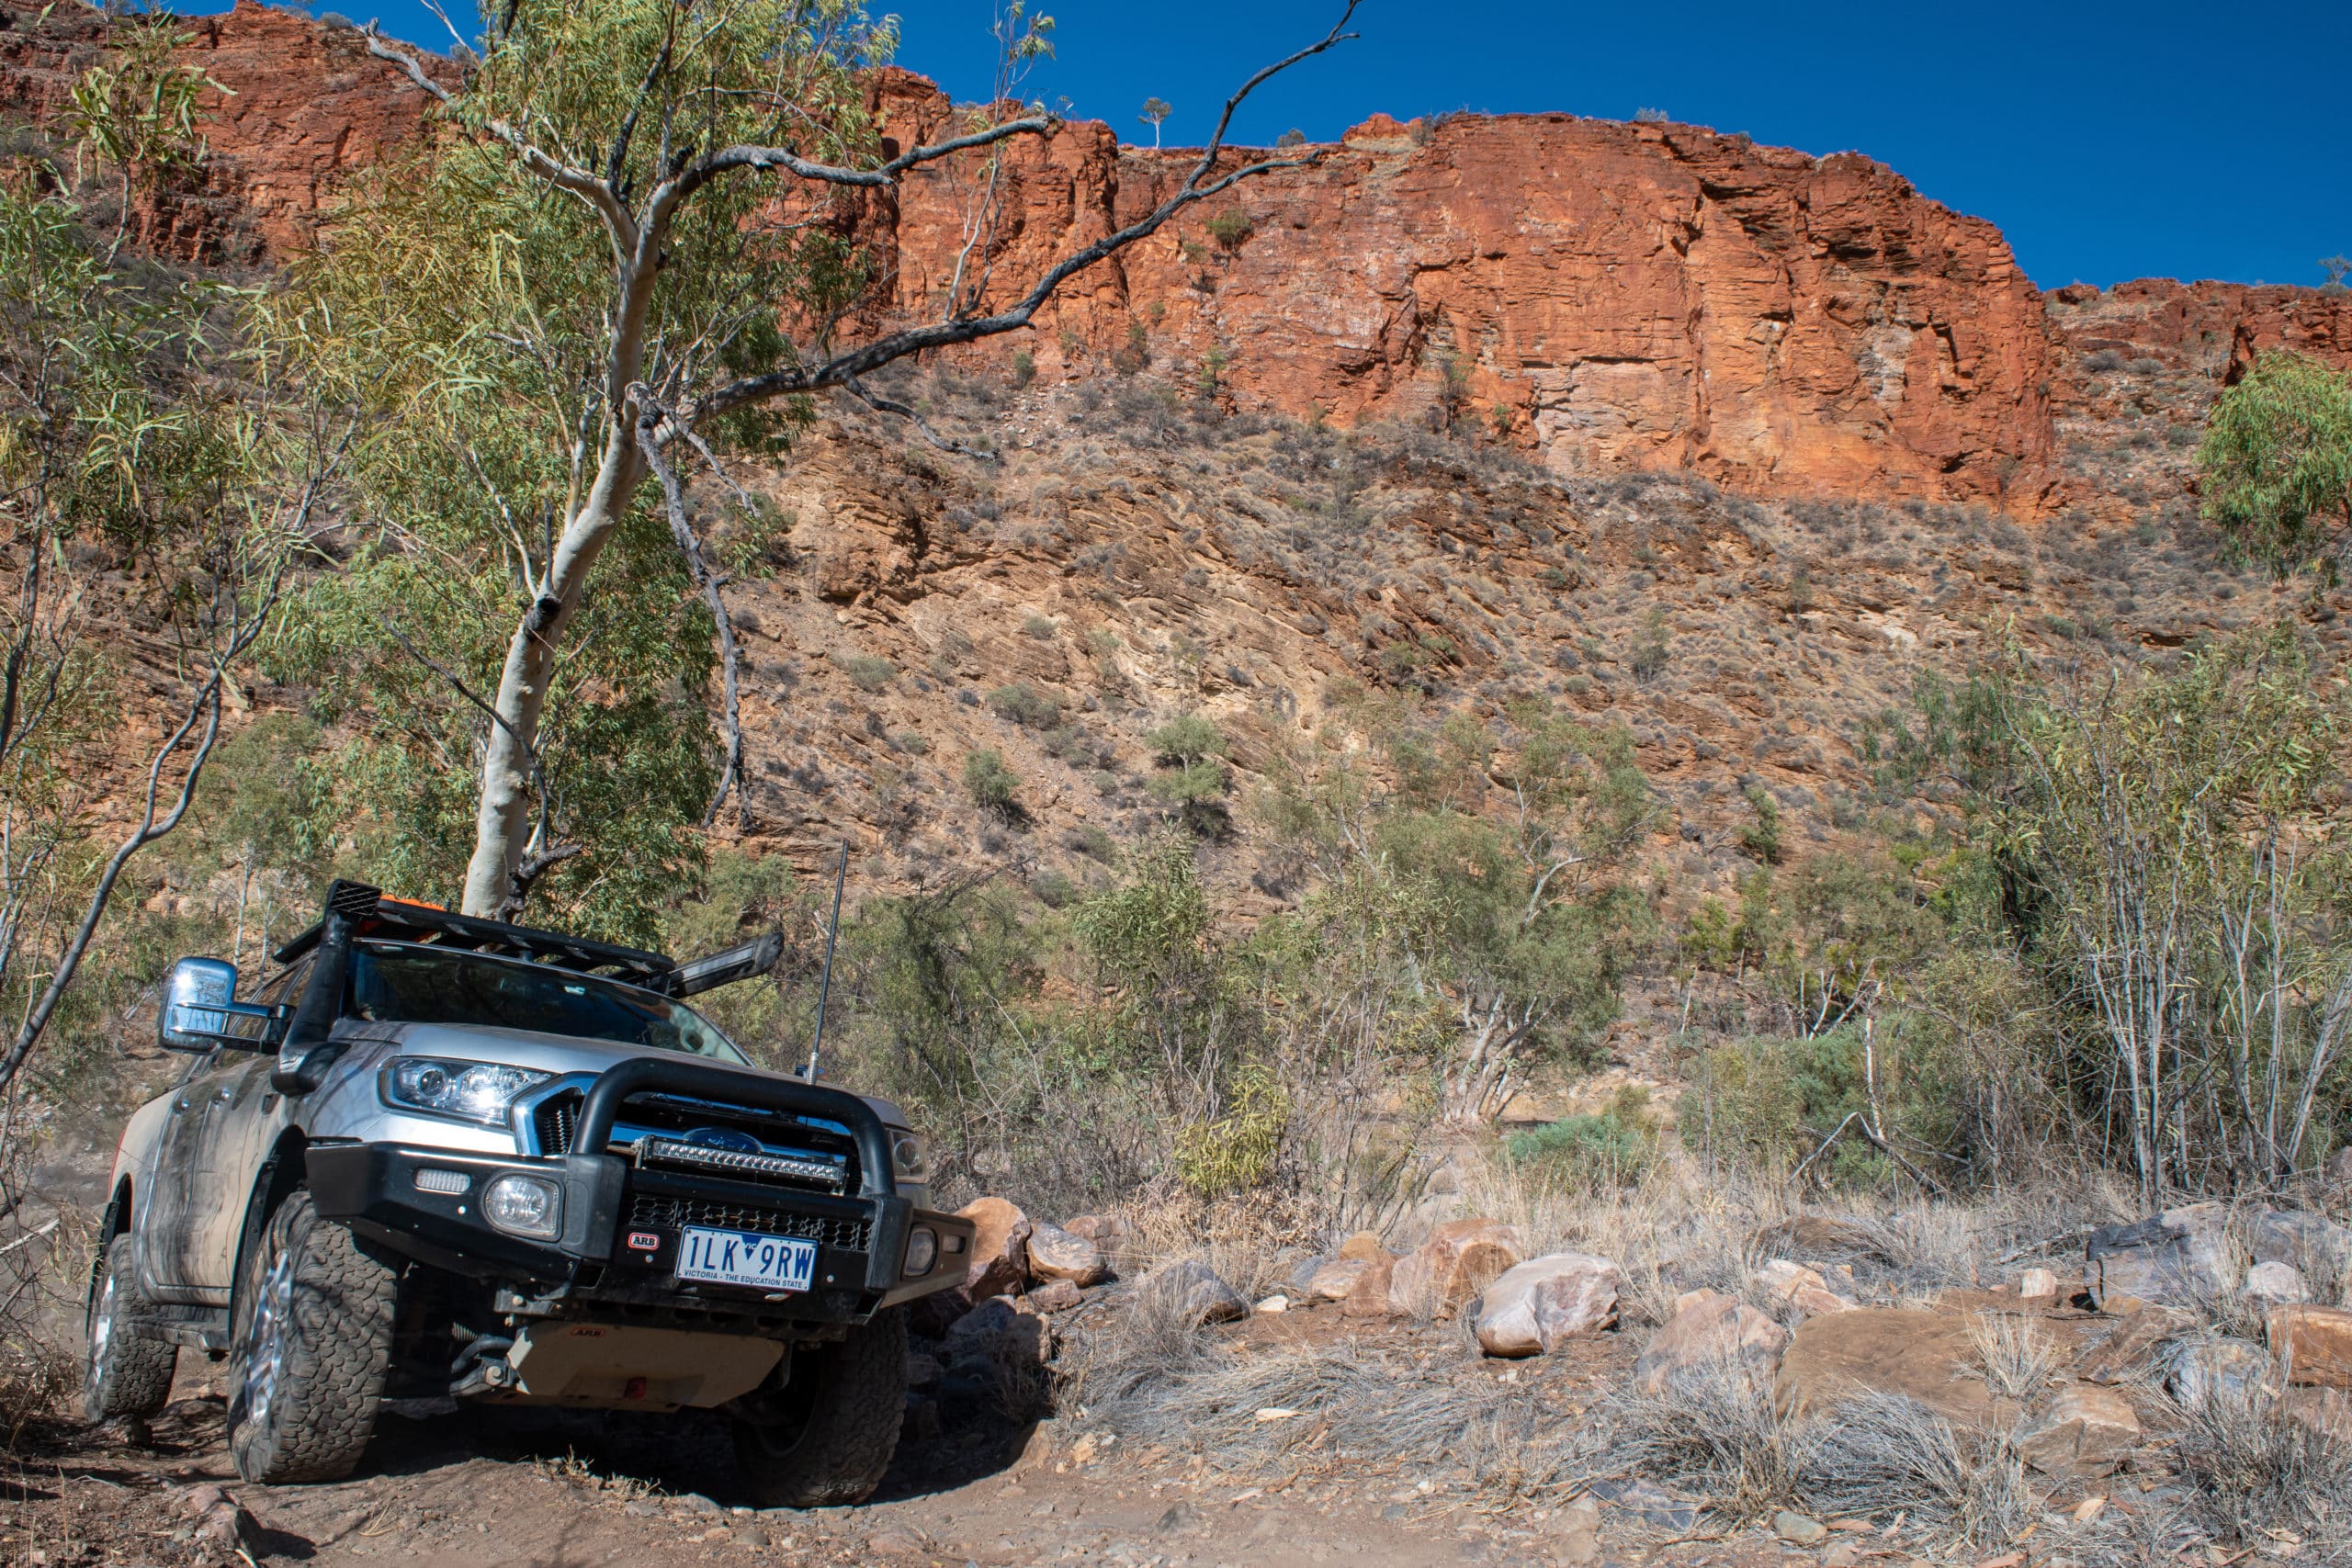 Ford Ranger four wheel driving in East MacDonnell Ranges, Northern Territory